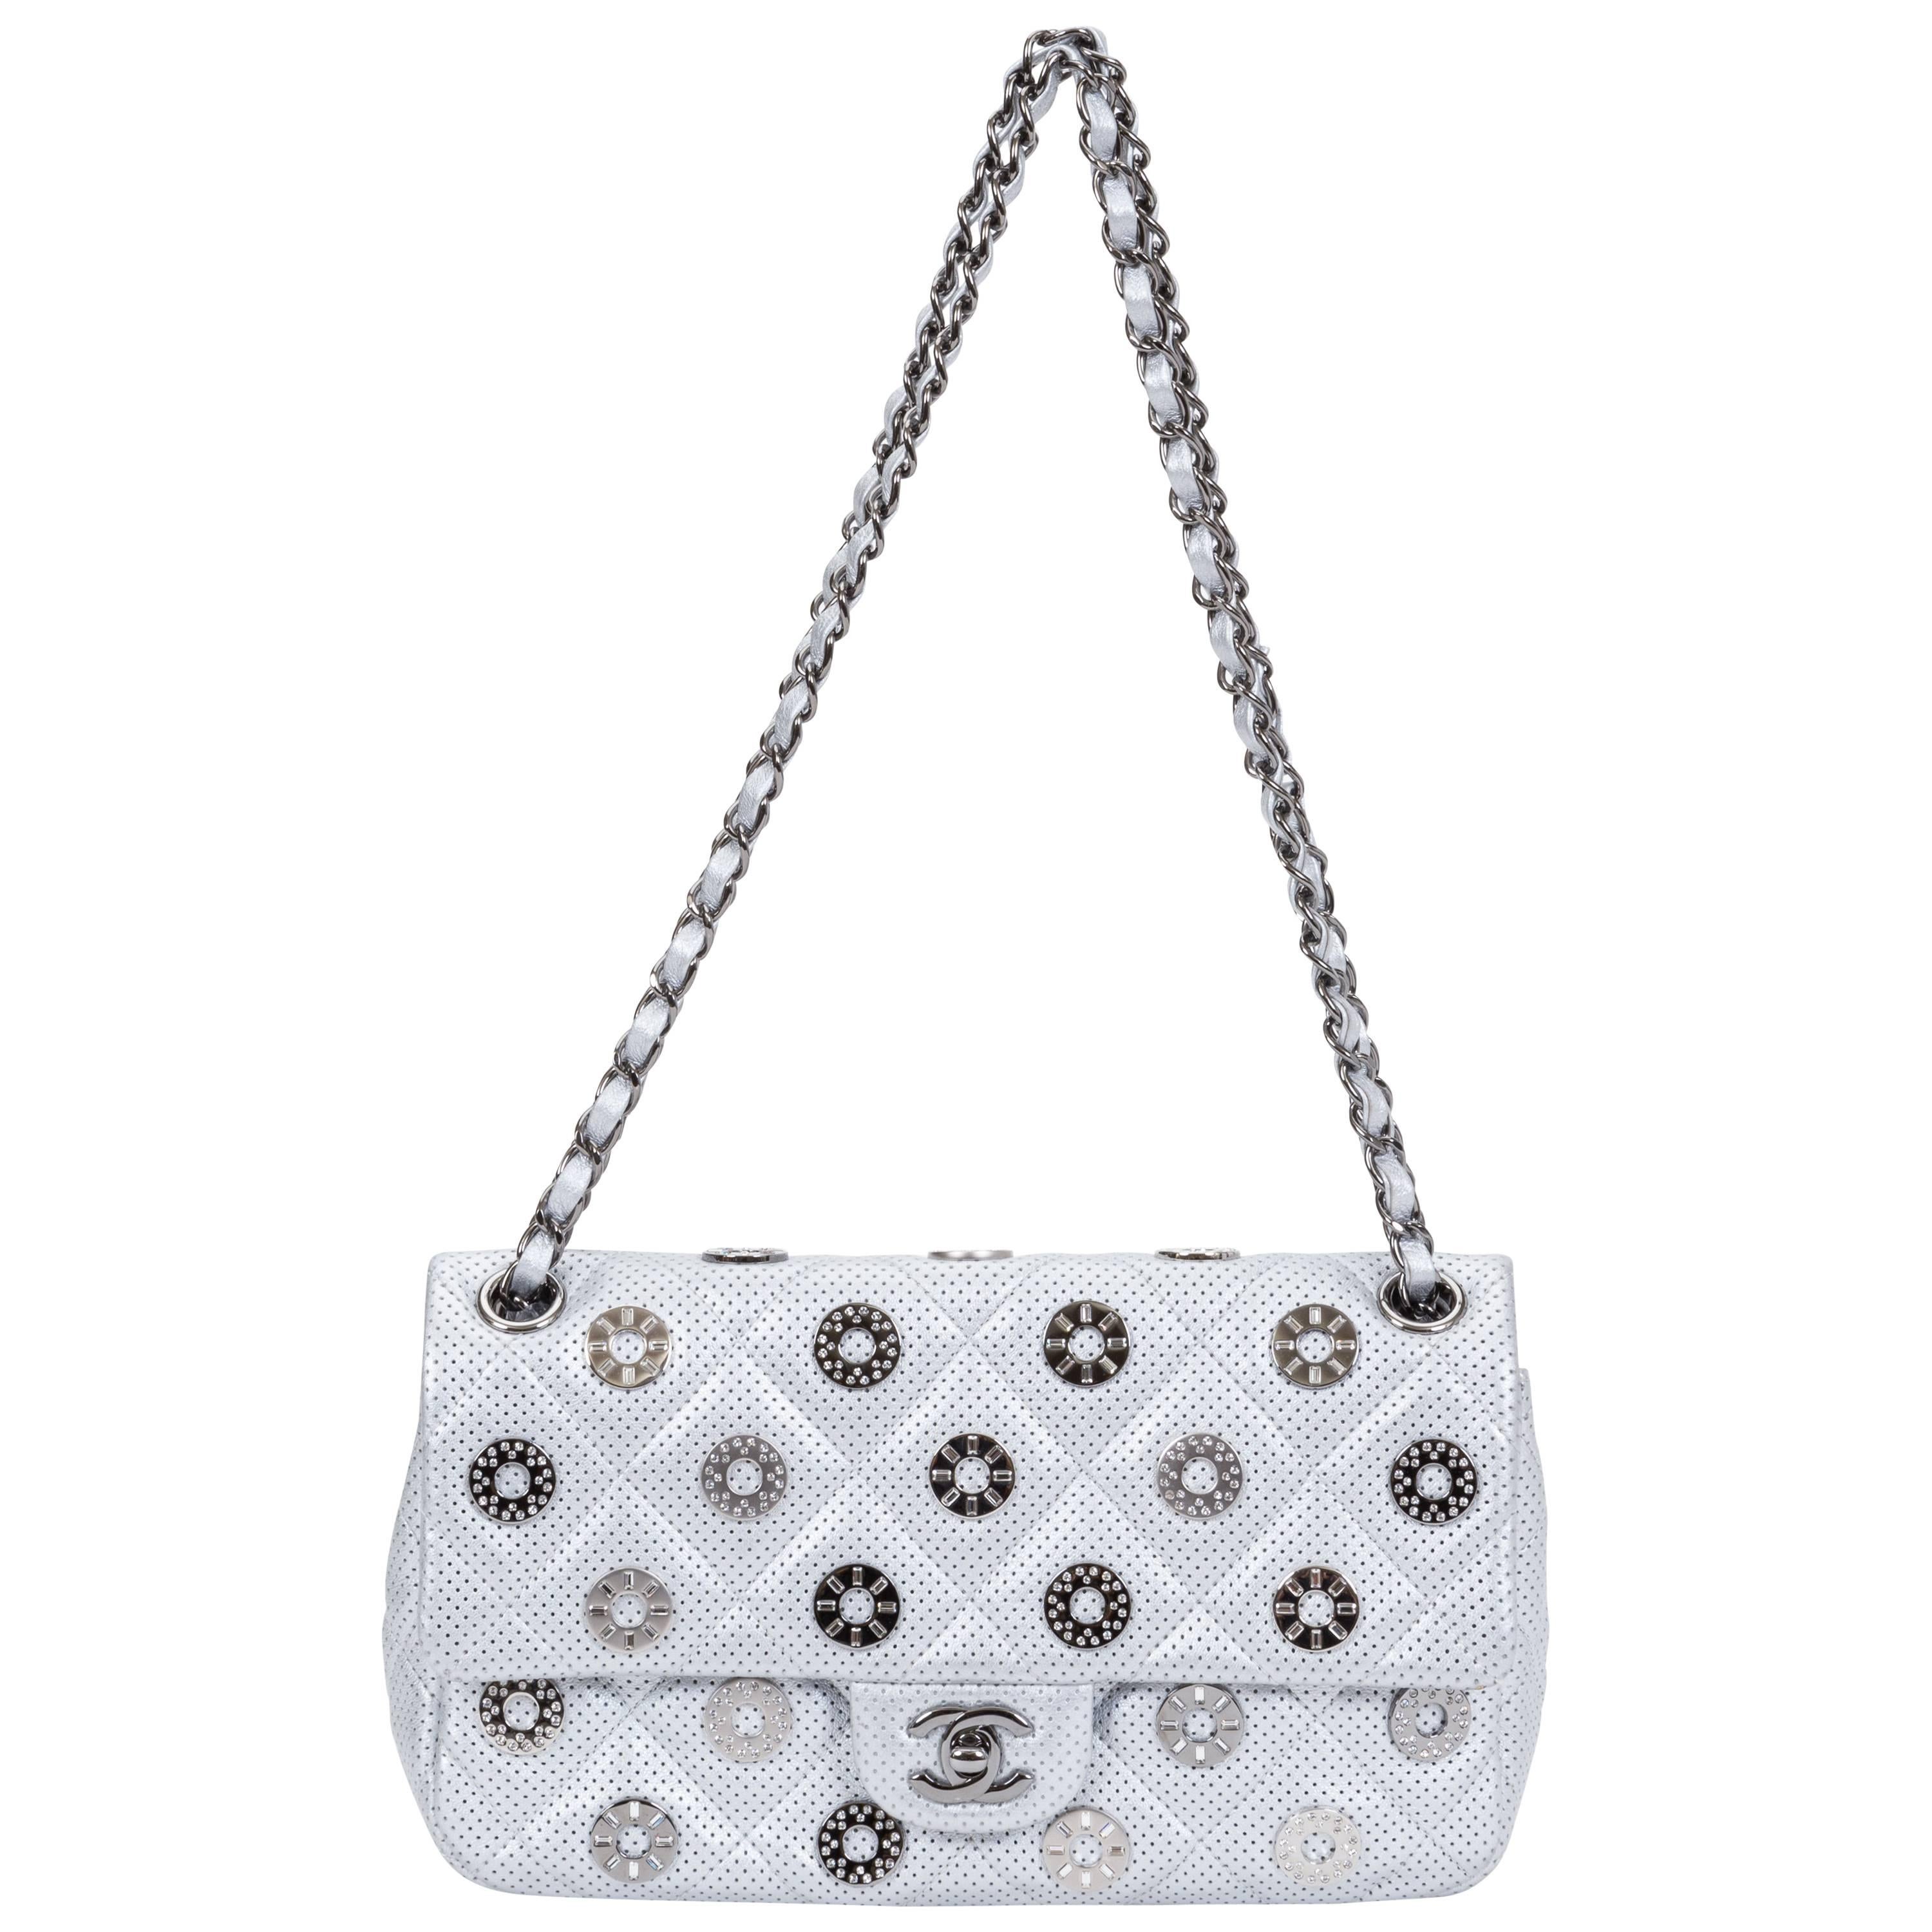 Chanel Limited Edition Silver Jewel Coin Flap Bag